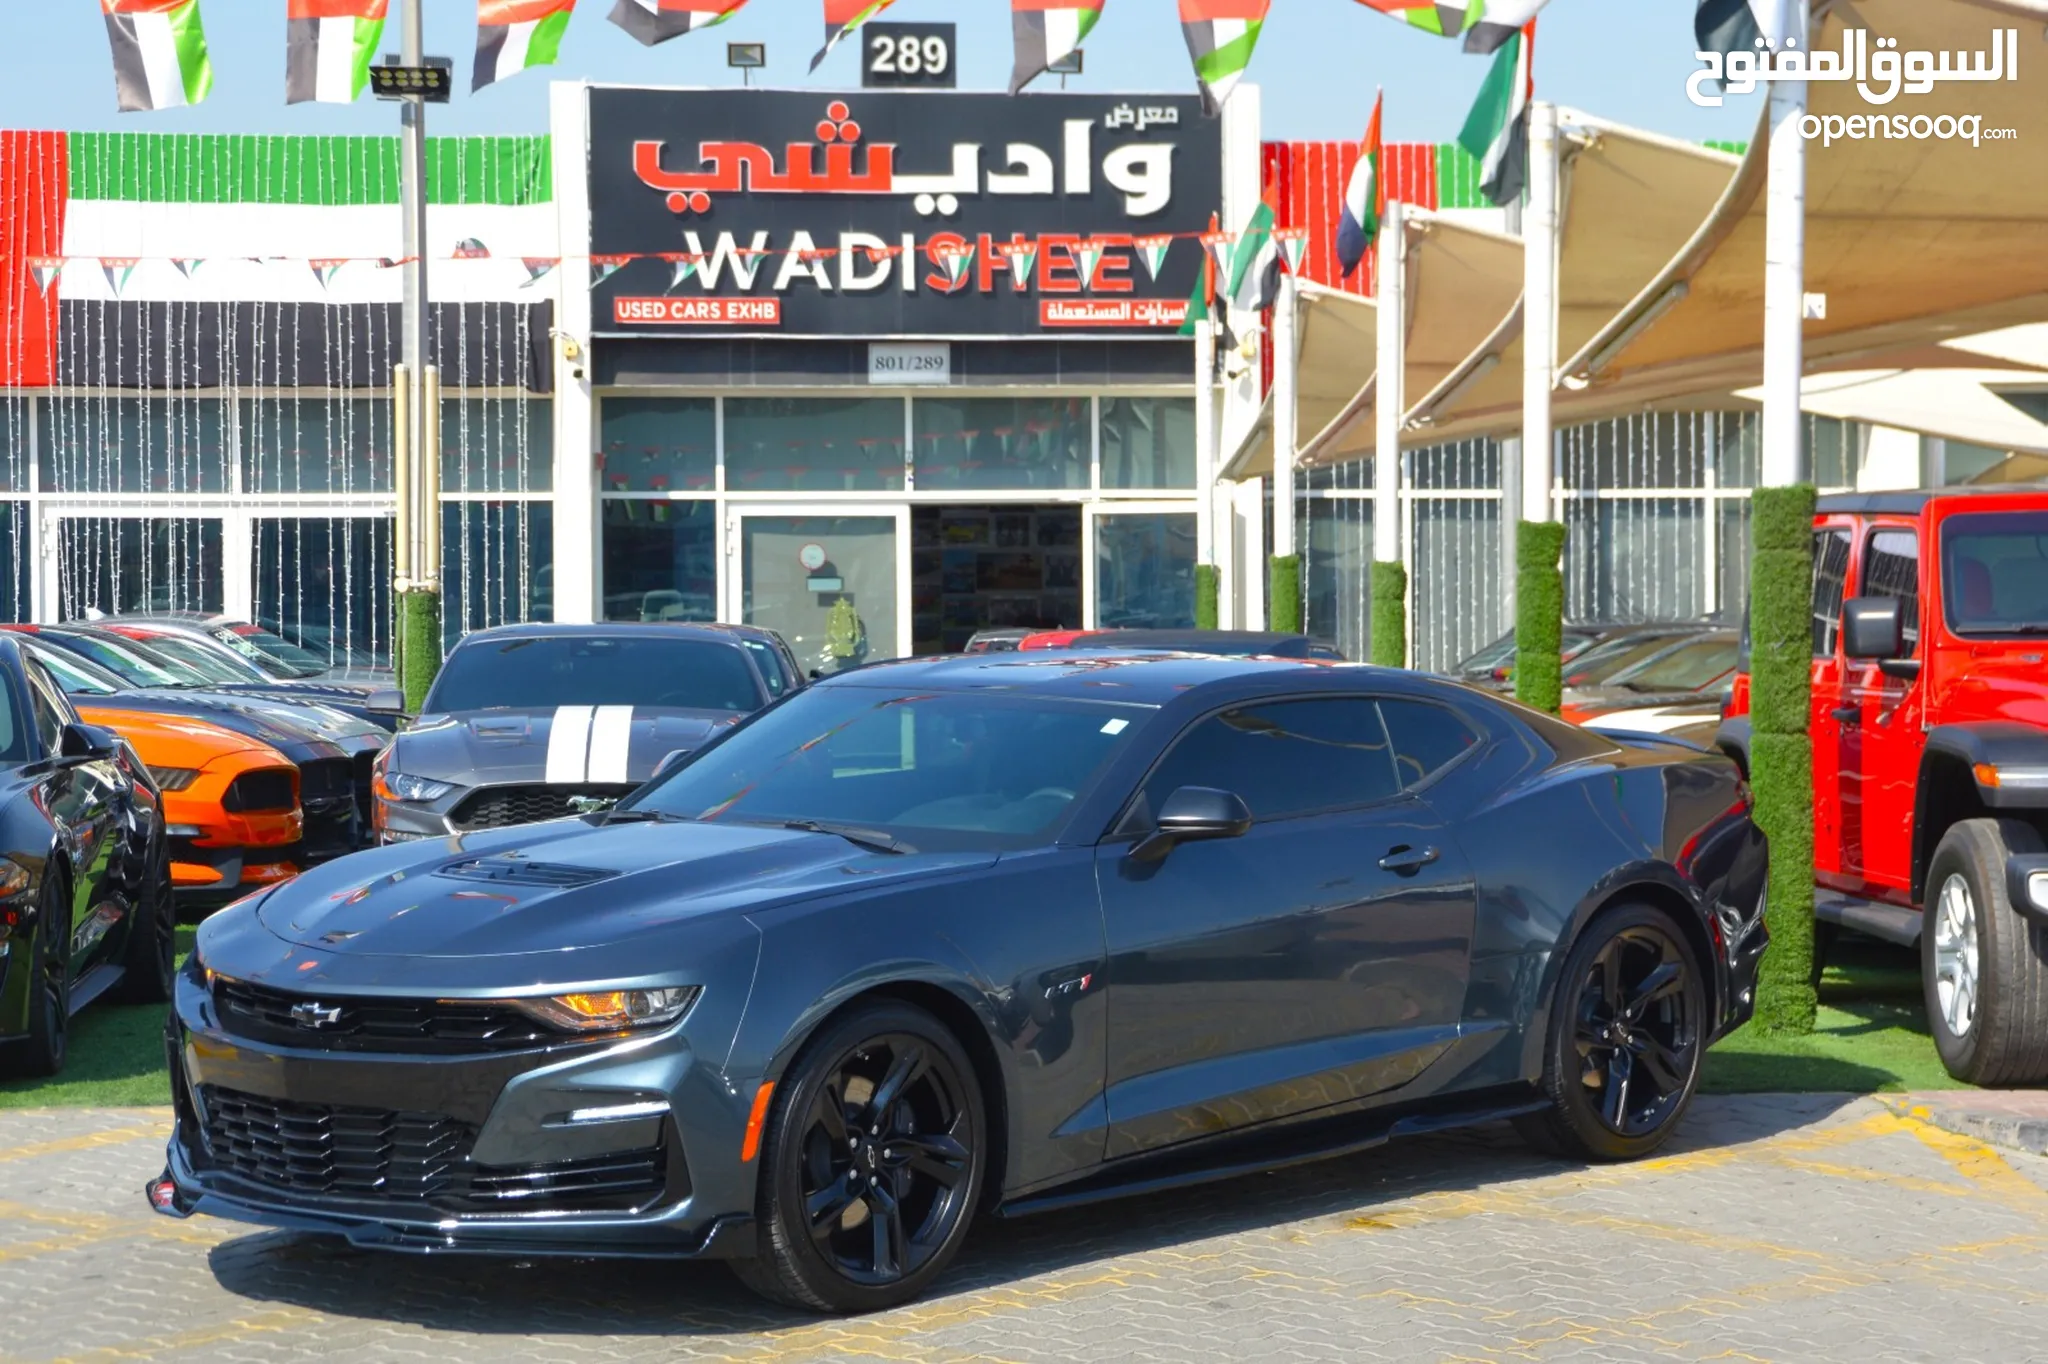 Chevrolet Camaro Cars for Sale in UAE : Best Prices : All Camaro Models :  New & Used | OpenSooq